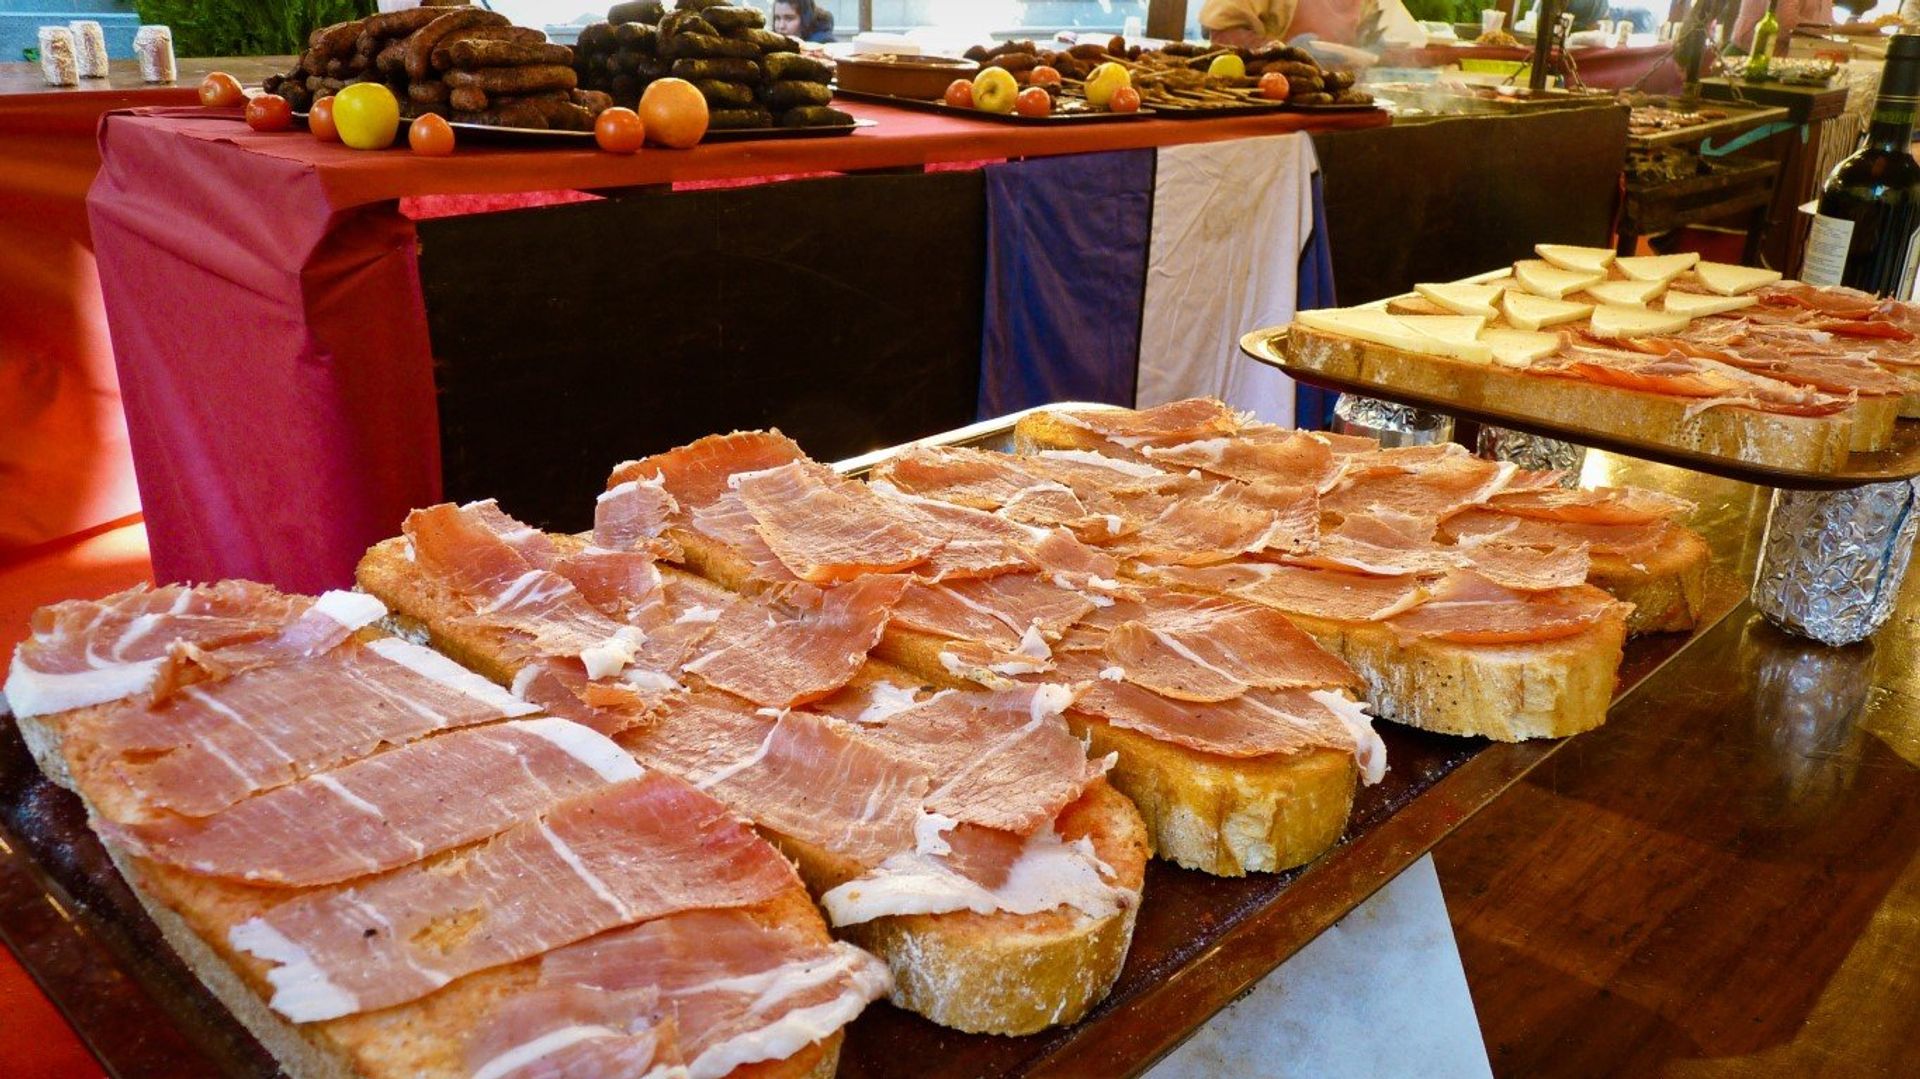 Sample the local delicacies at the traditional market held every Tuesday in Monserratina neighbourhood